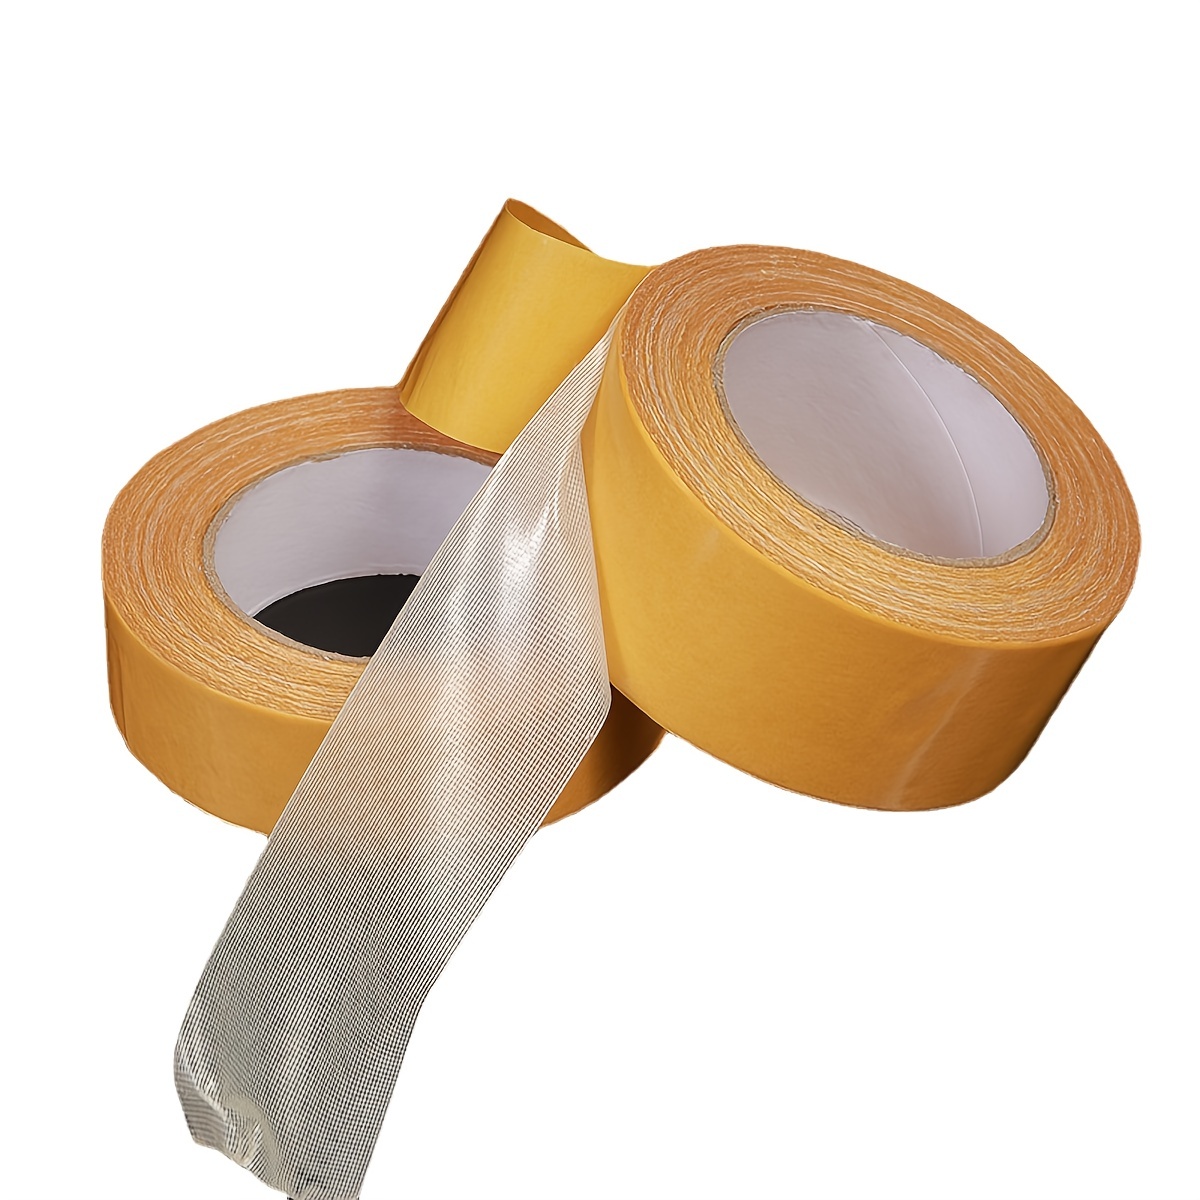 Heavy Duty Tape - Double-Sided Strong Cove Base Adhesive